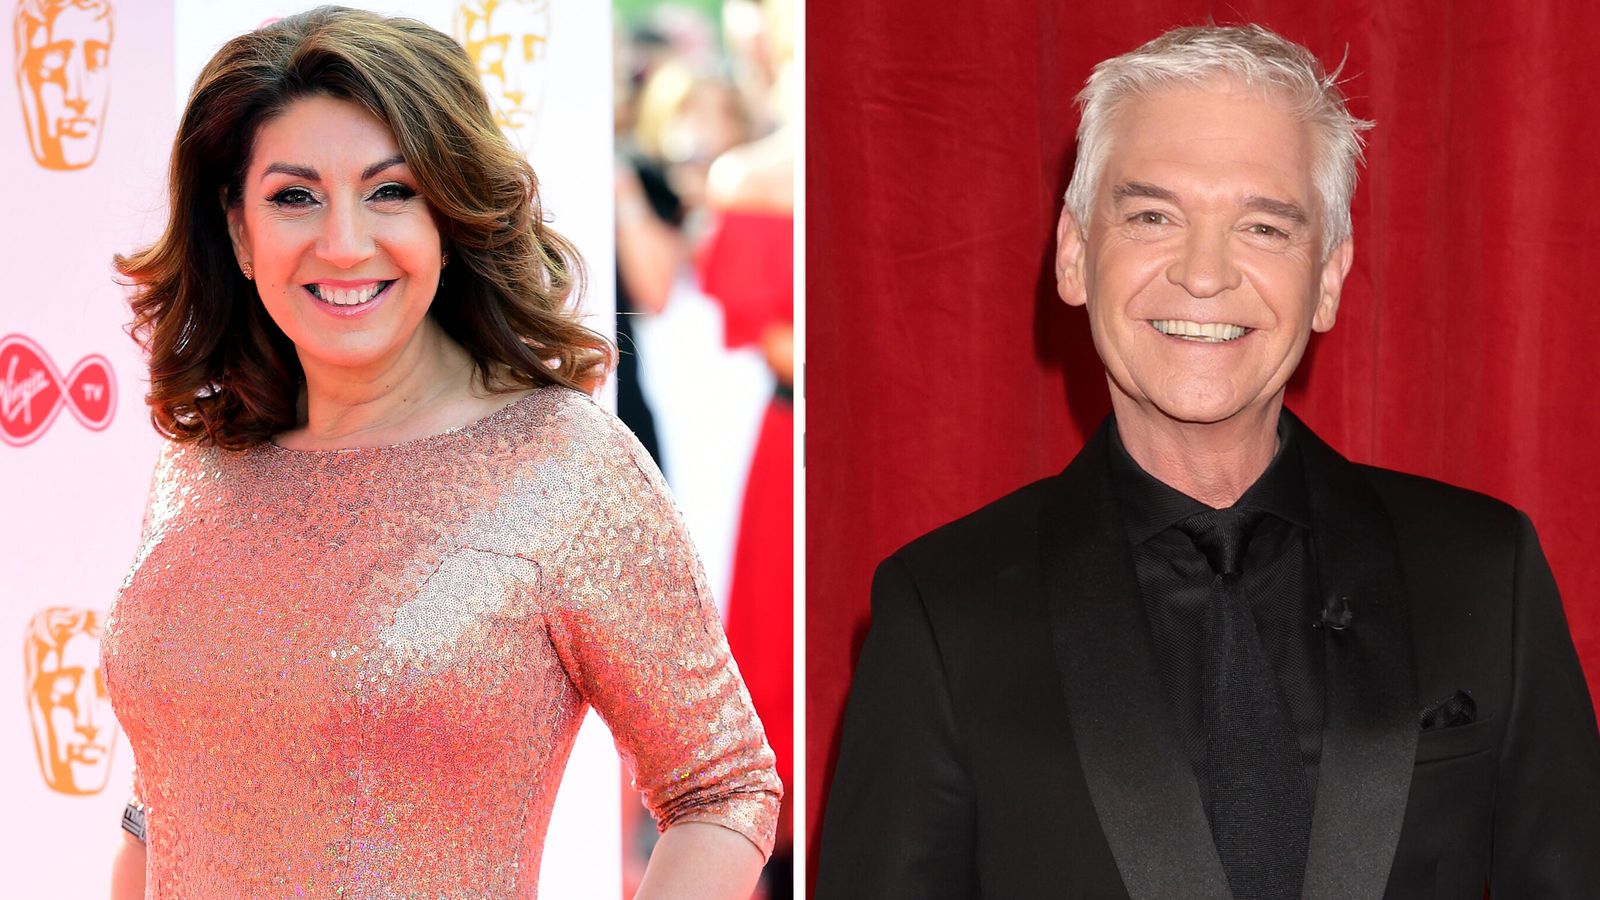 Jane McDonald to replace Phillip Schofield as British Soap Awards host